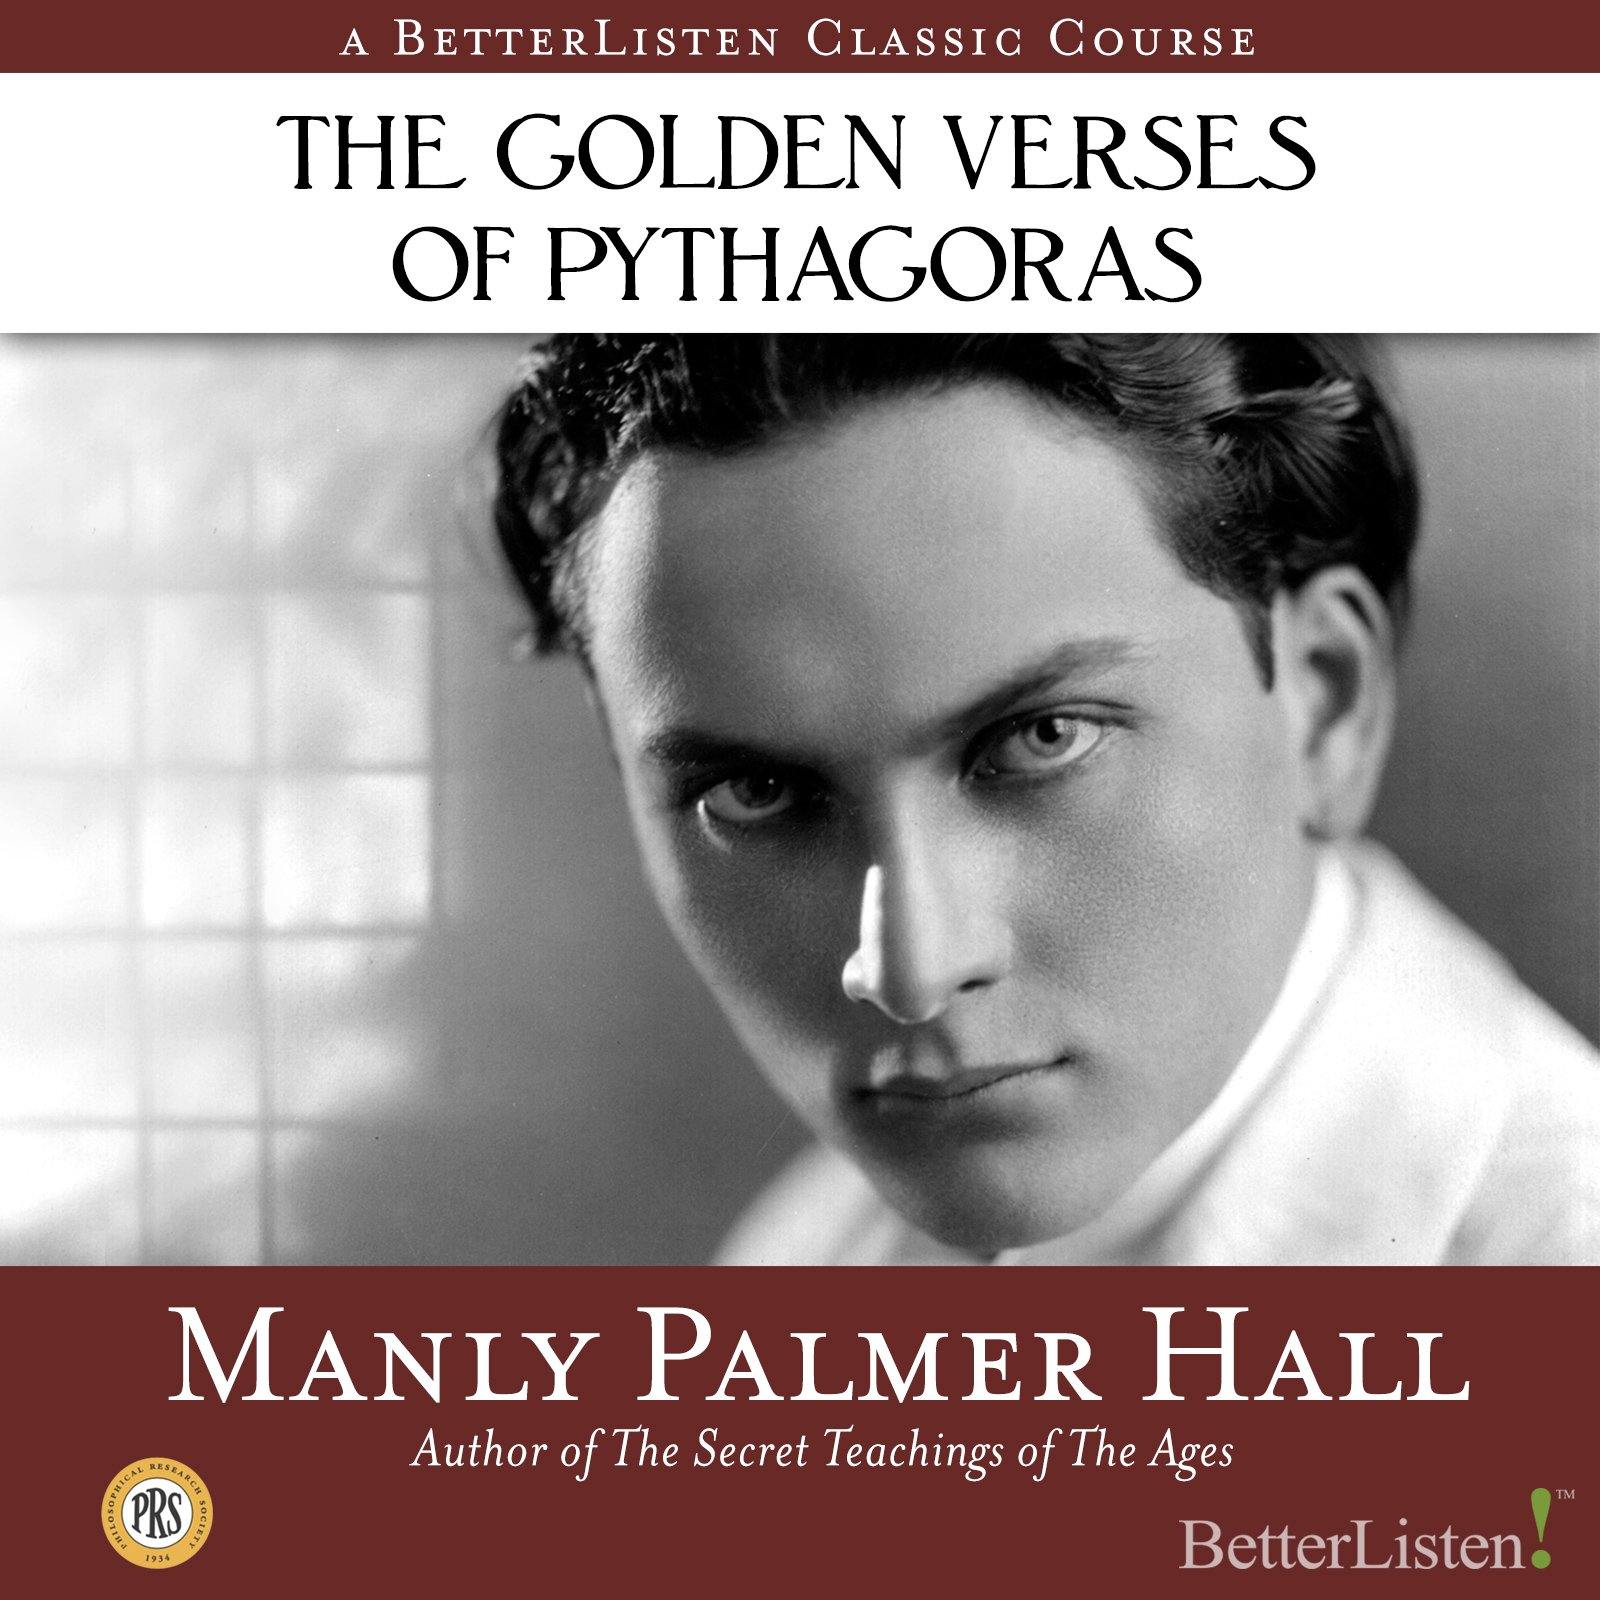 The Golden Verses of Pythagoras with Manly P. Hall - BetterListen!